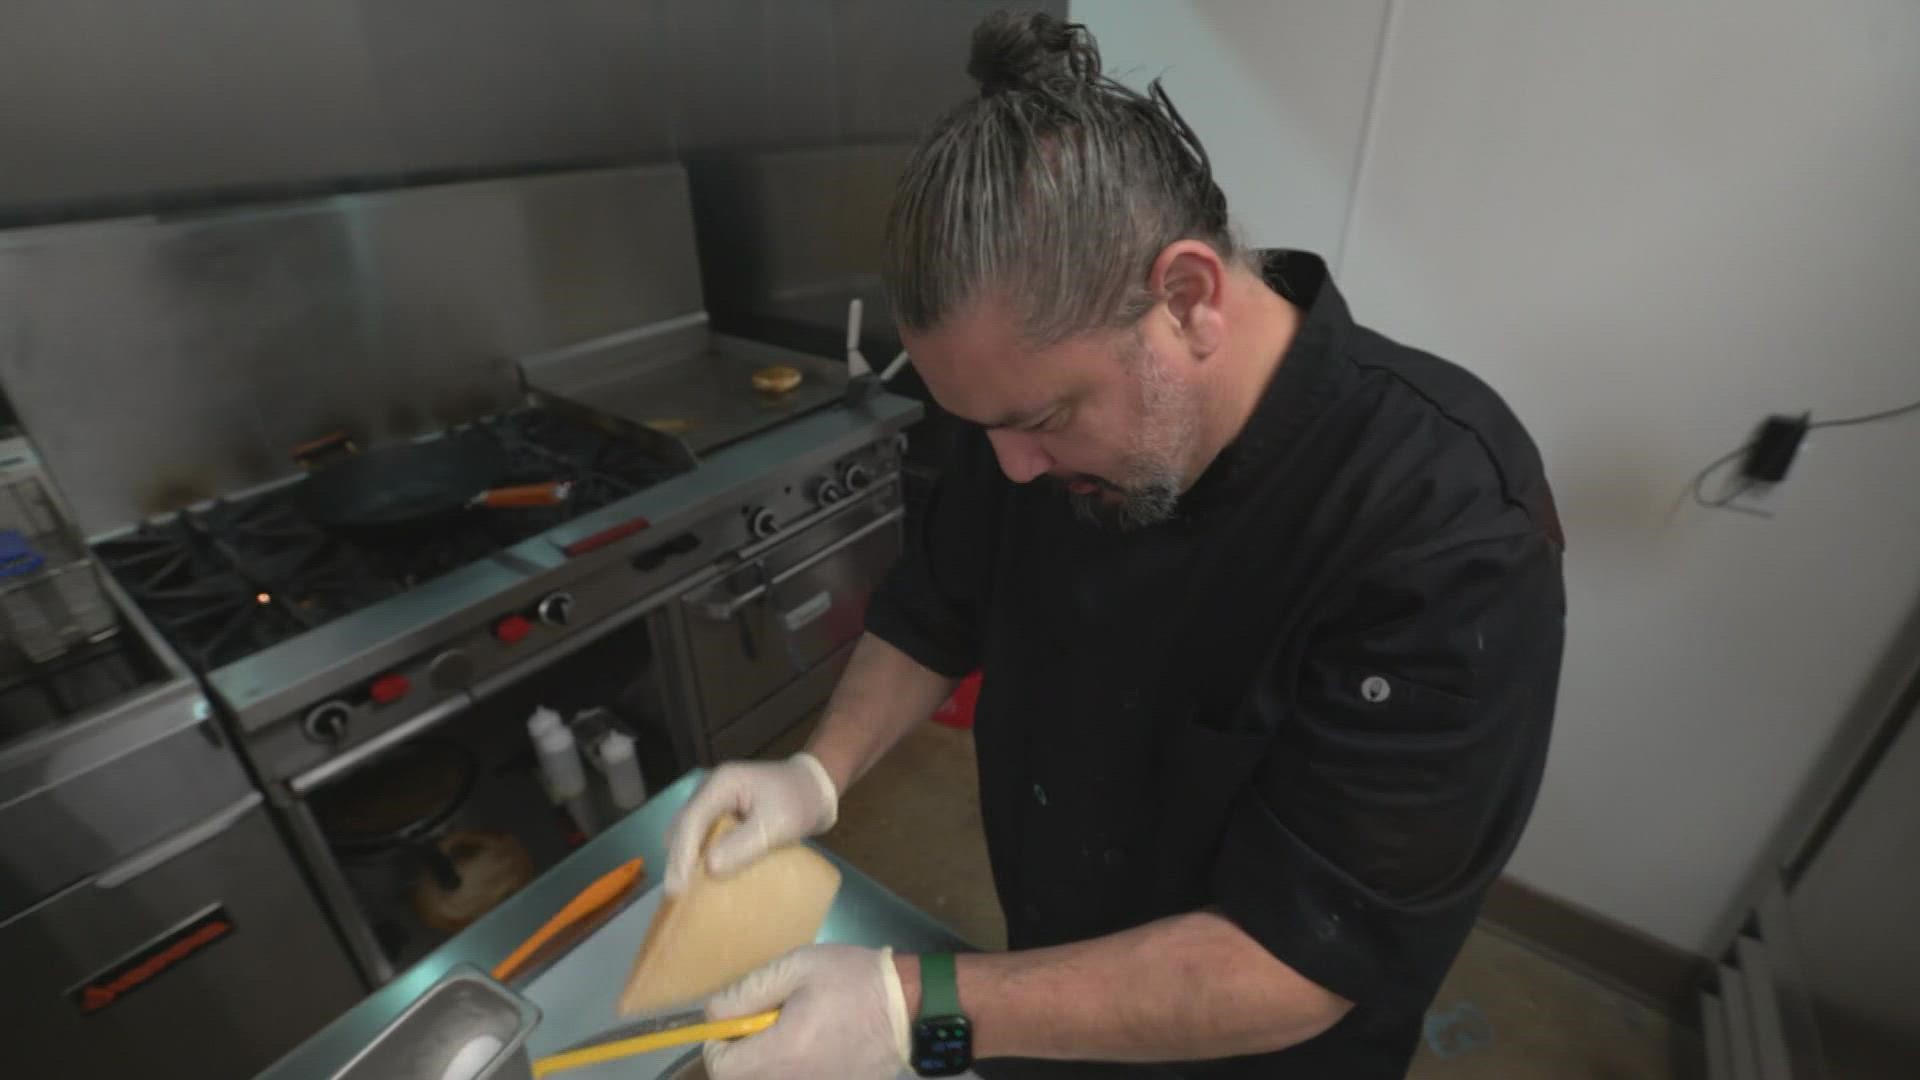 "It's my turn to do something different," said Jose Luis Rodriguez, chef and owner of MixTitos Kitchen. "I'm trying to do the best I can to succeed on this."